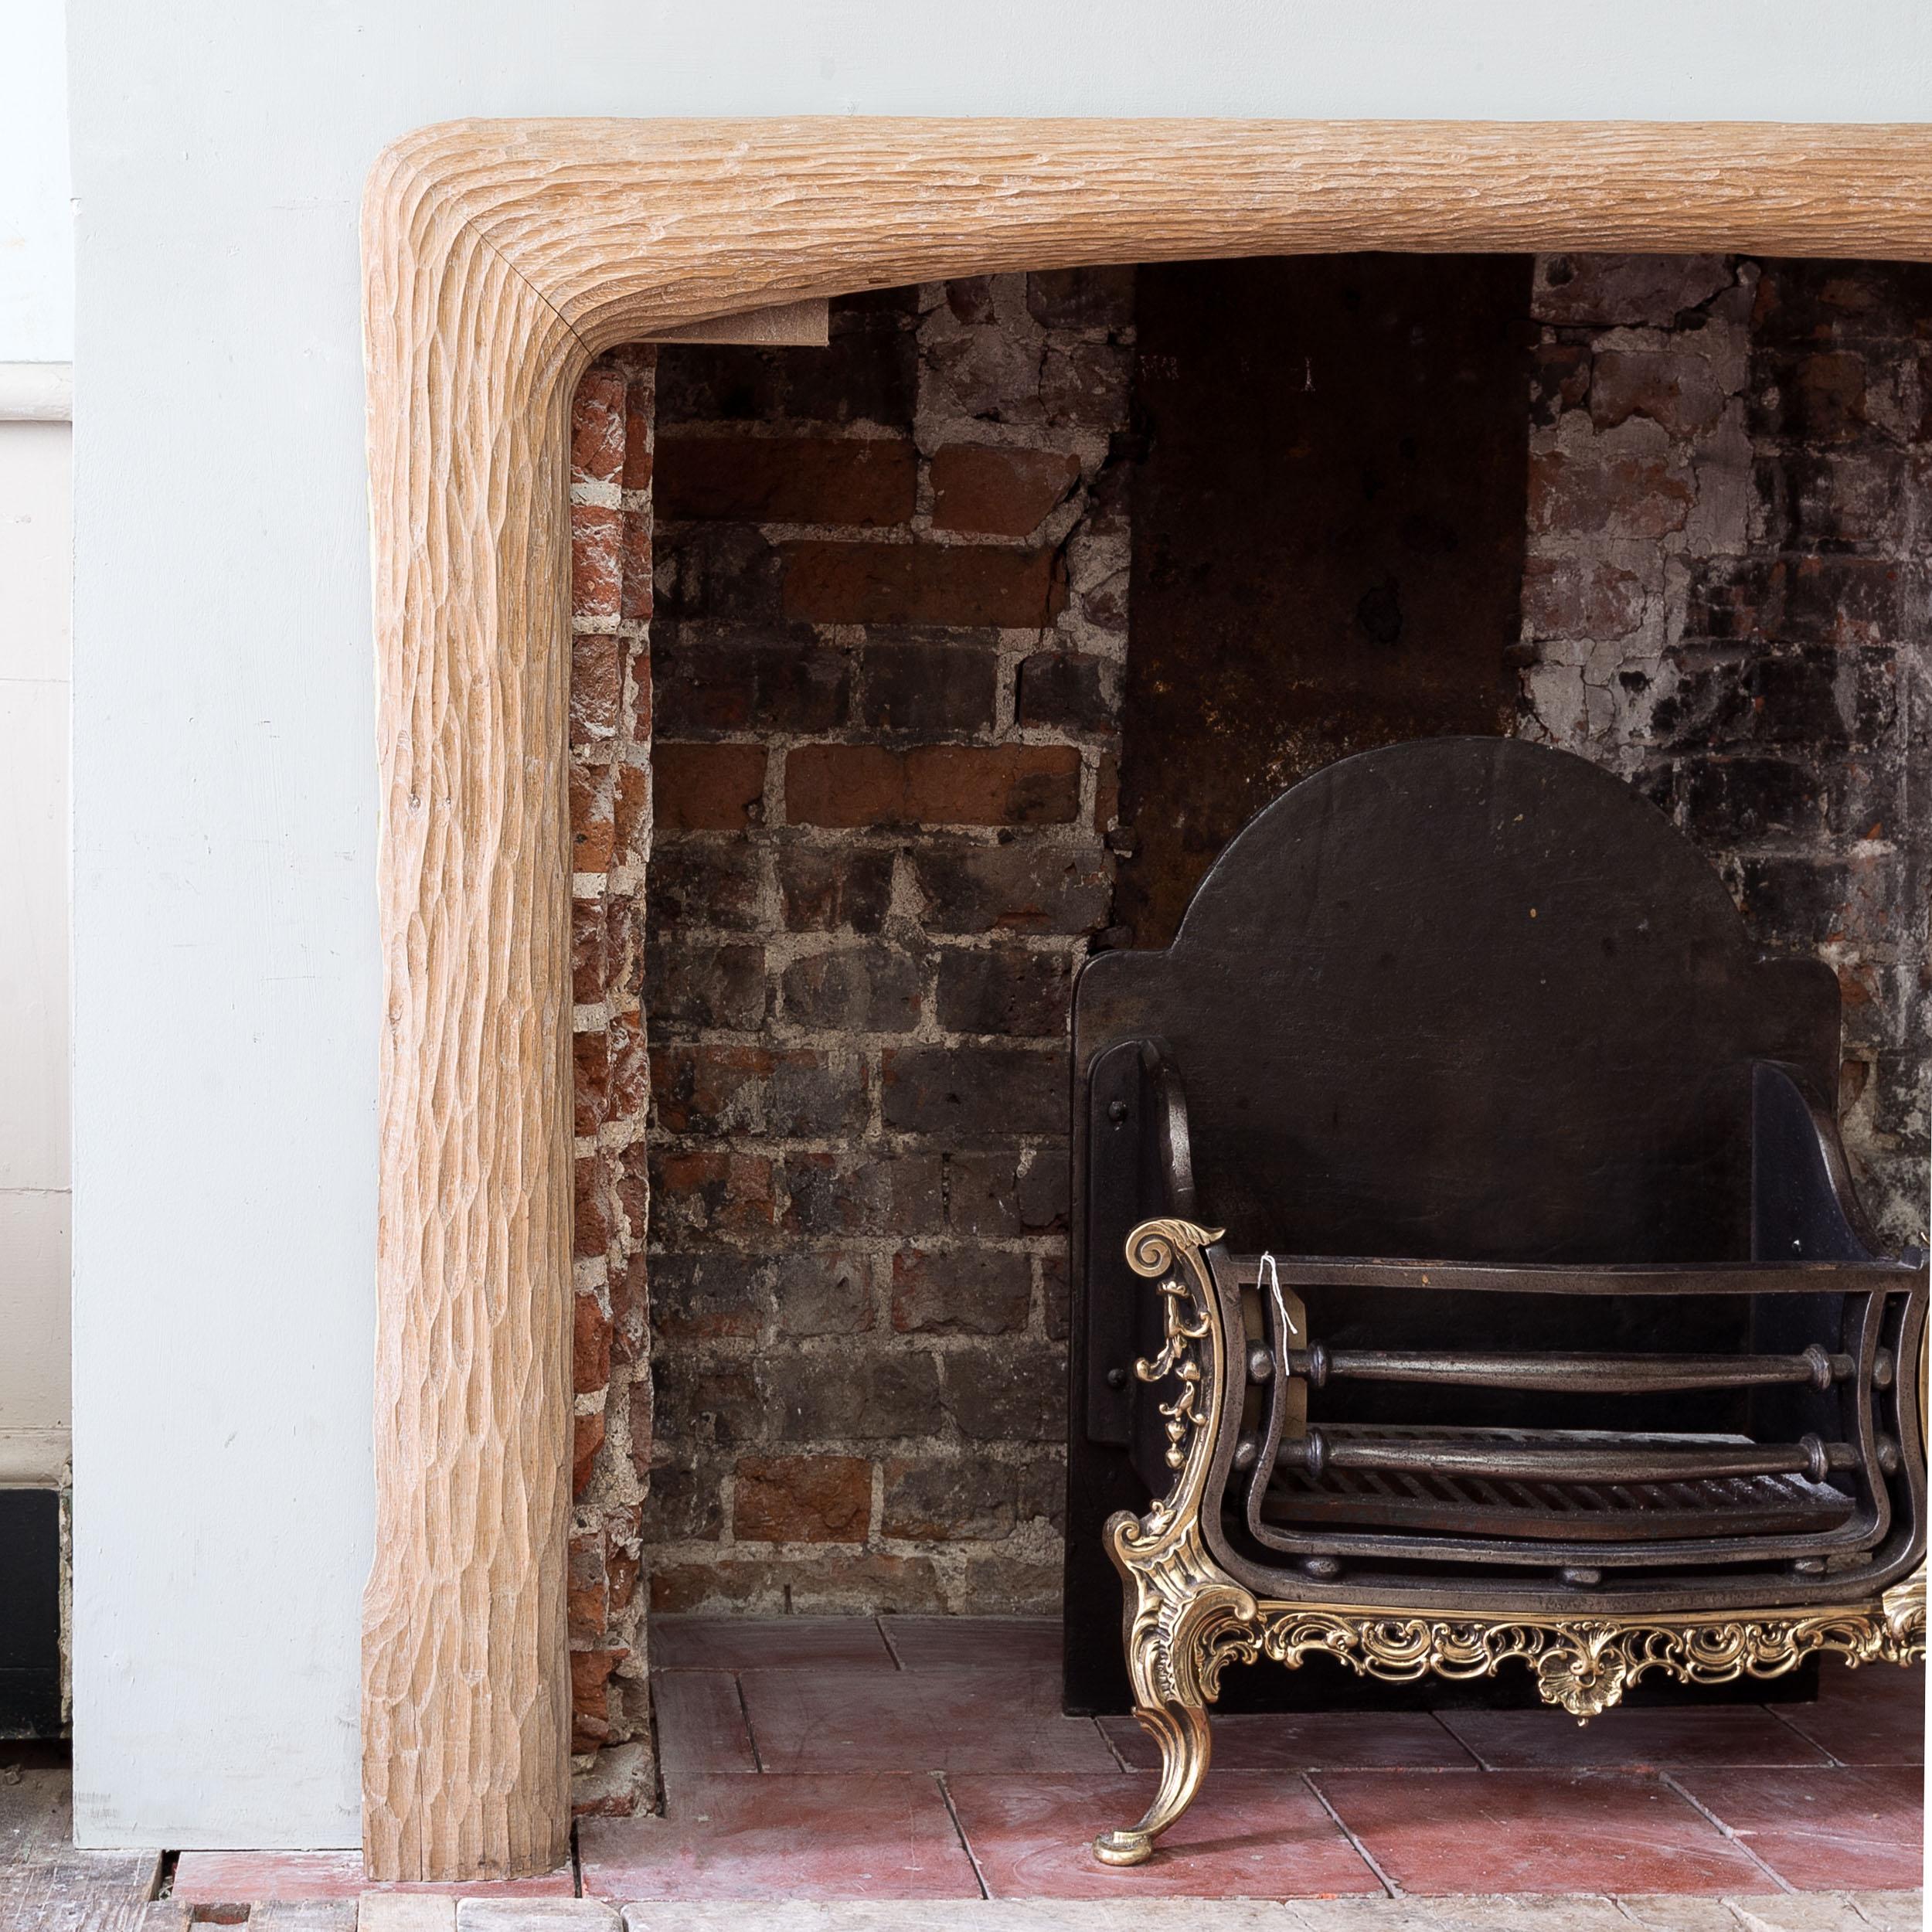 1970s Carved oak fire surround by John Makepeace OBE (b.1939), of naturalistic form.

Opening width 117 cm x 91 cm high.